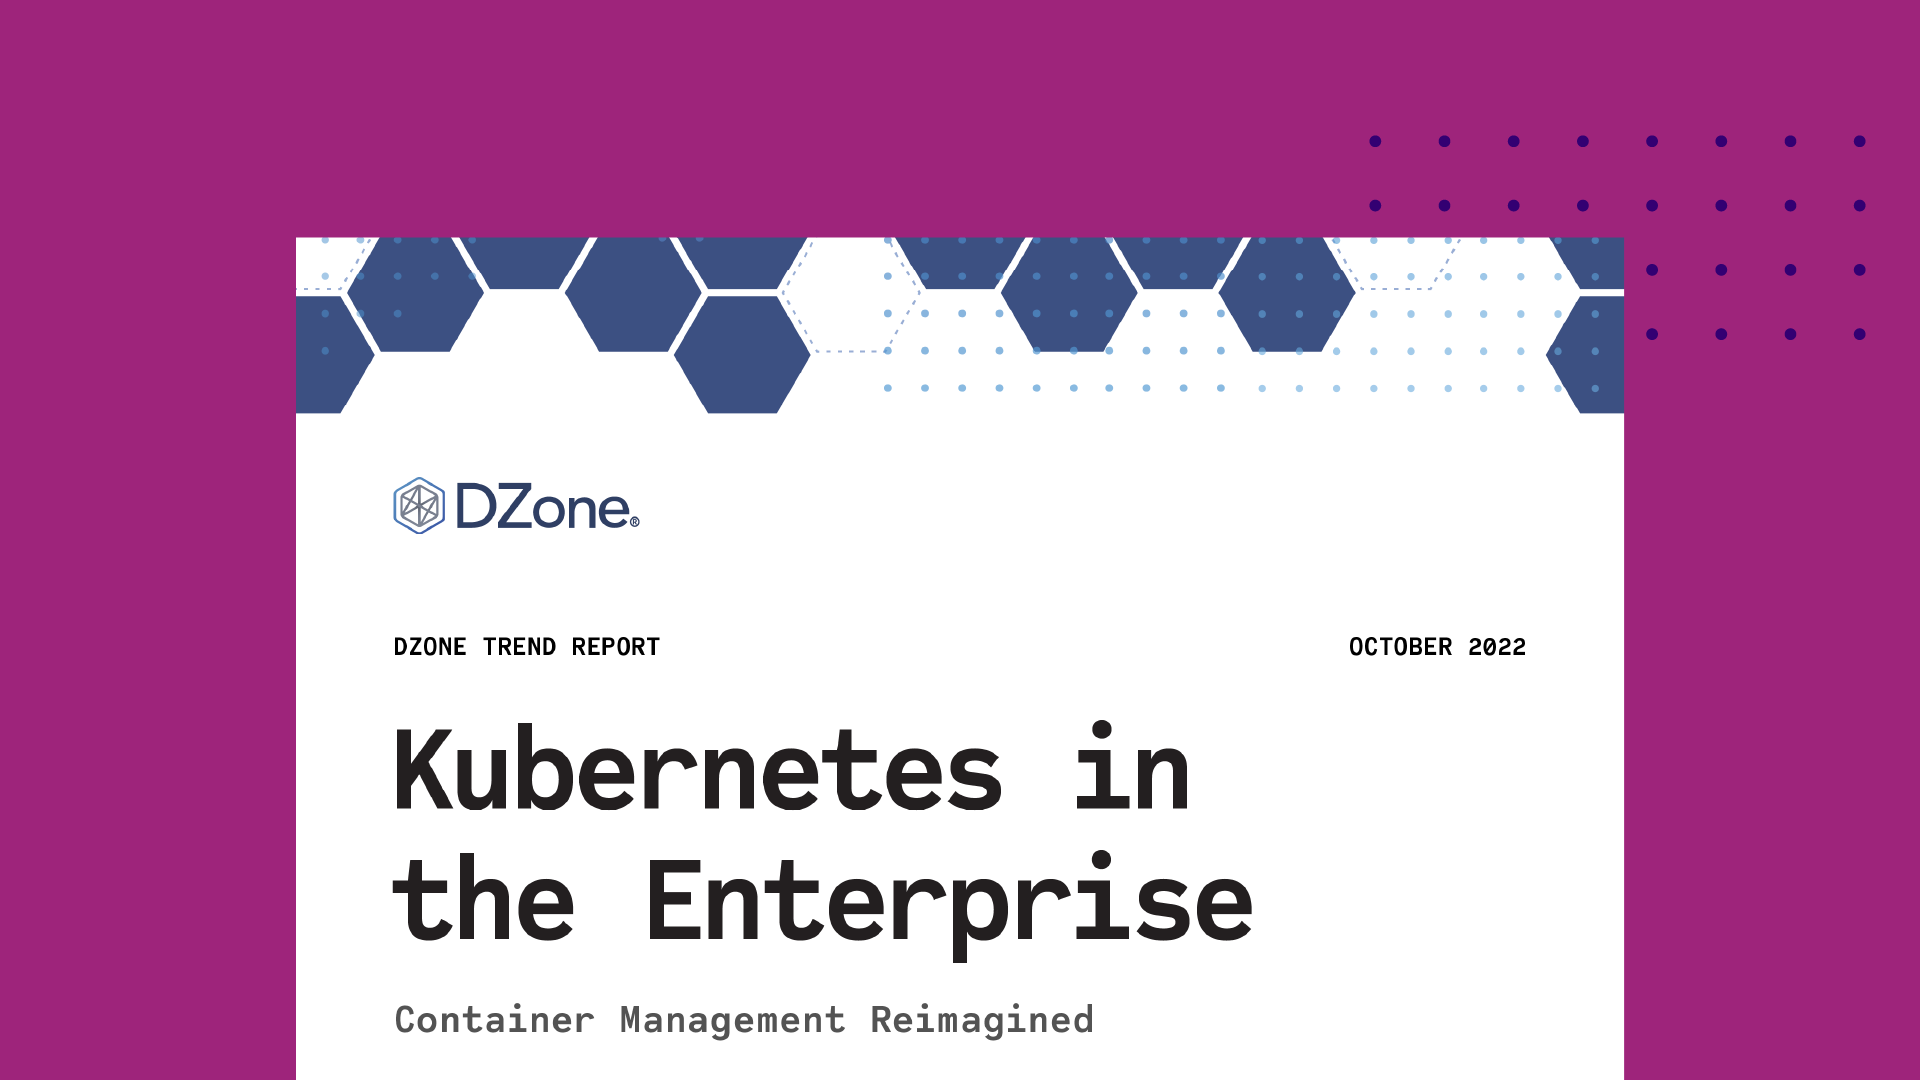 Kubernetes in the Enterprise Trend Report